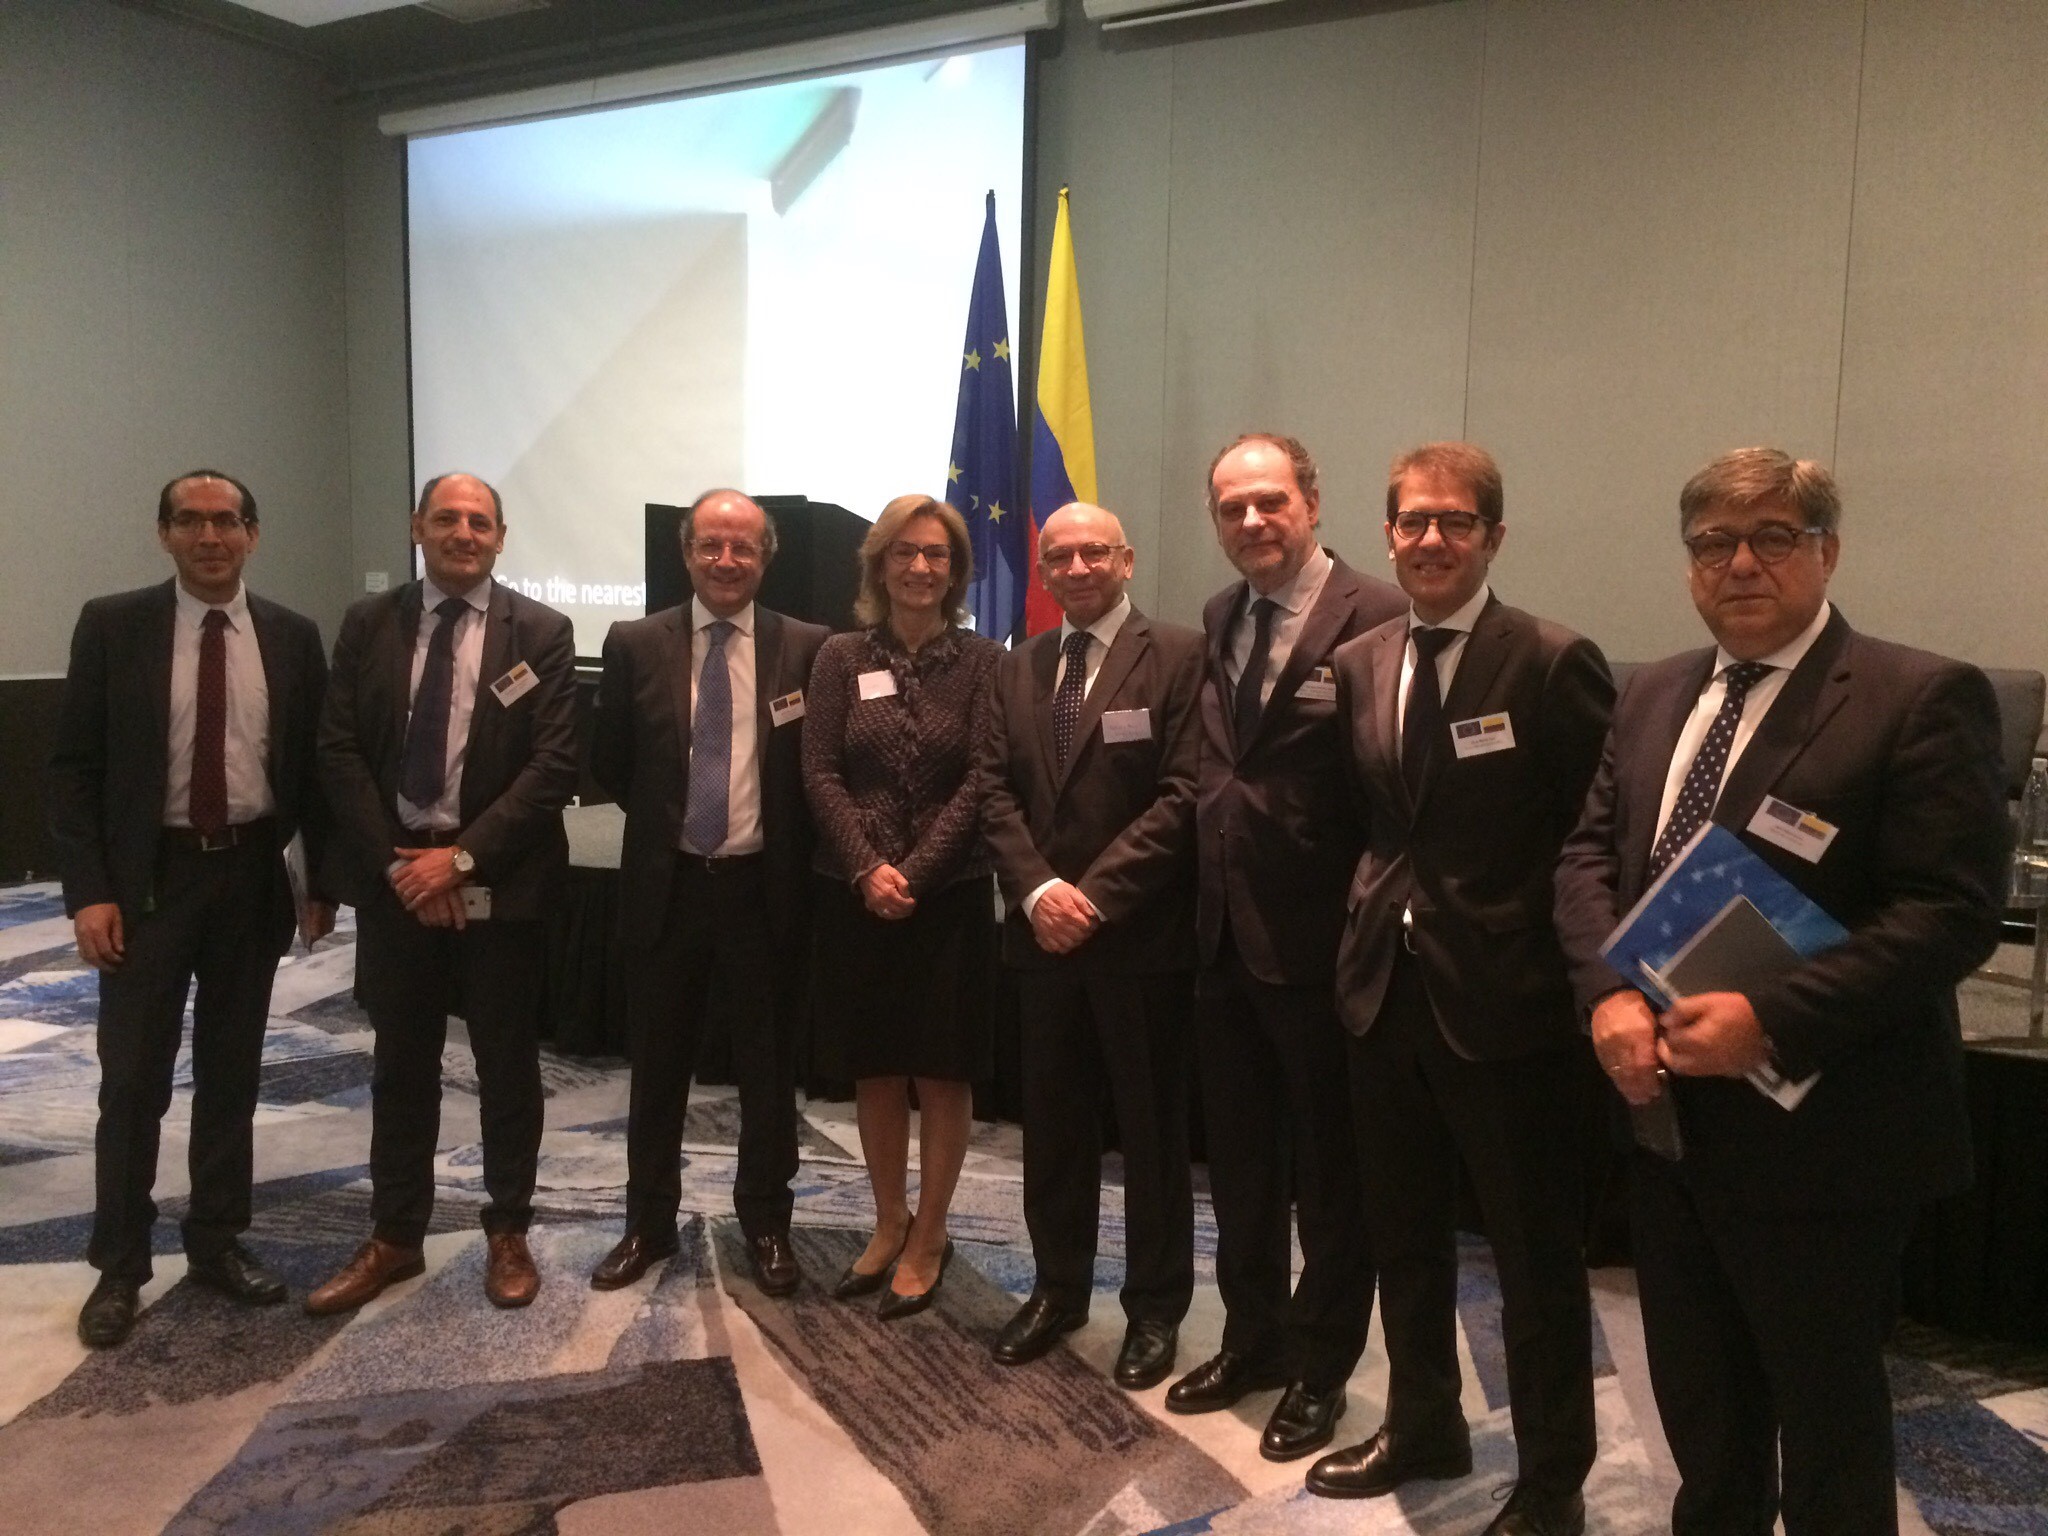 Emgrisa participated with 40 EU companies in the Circular Economy Mission to Colombia